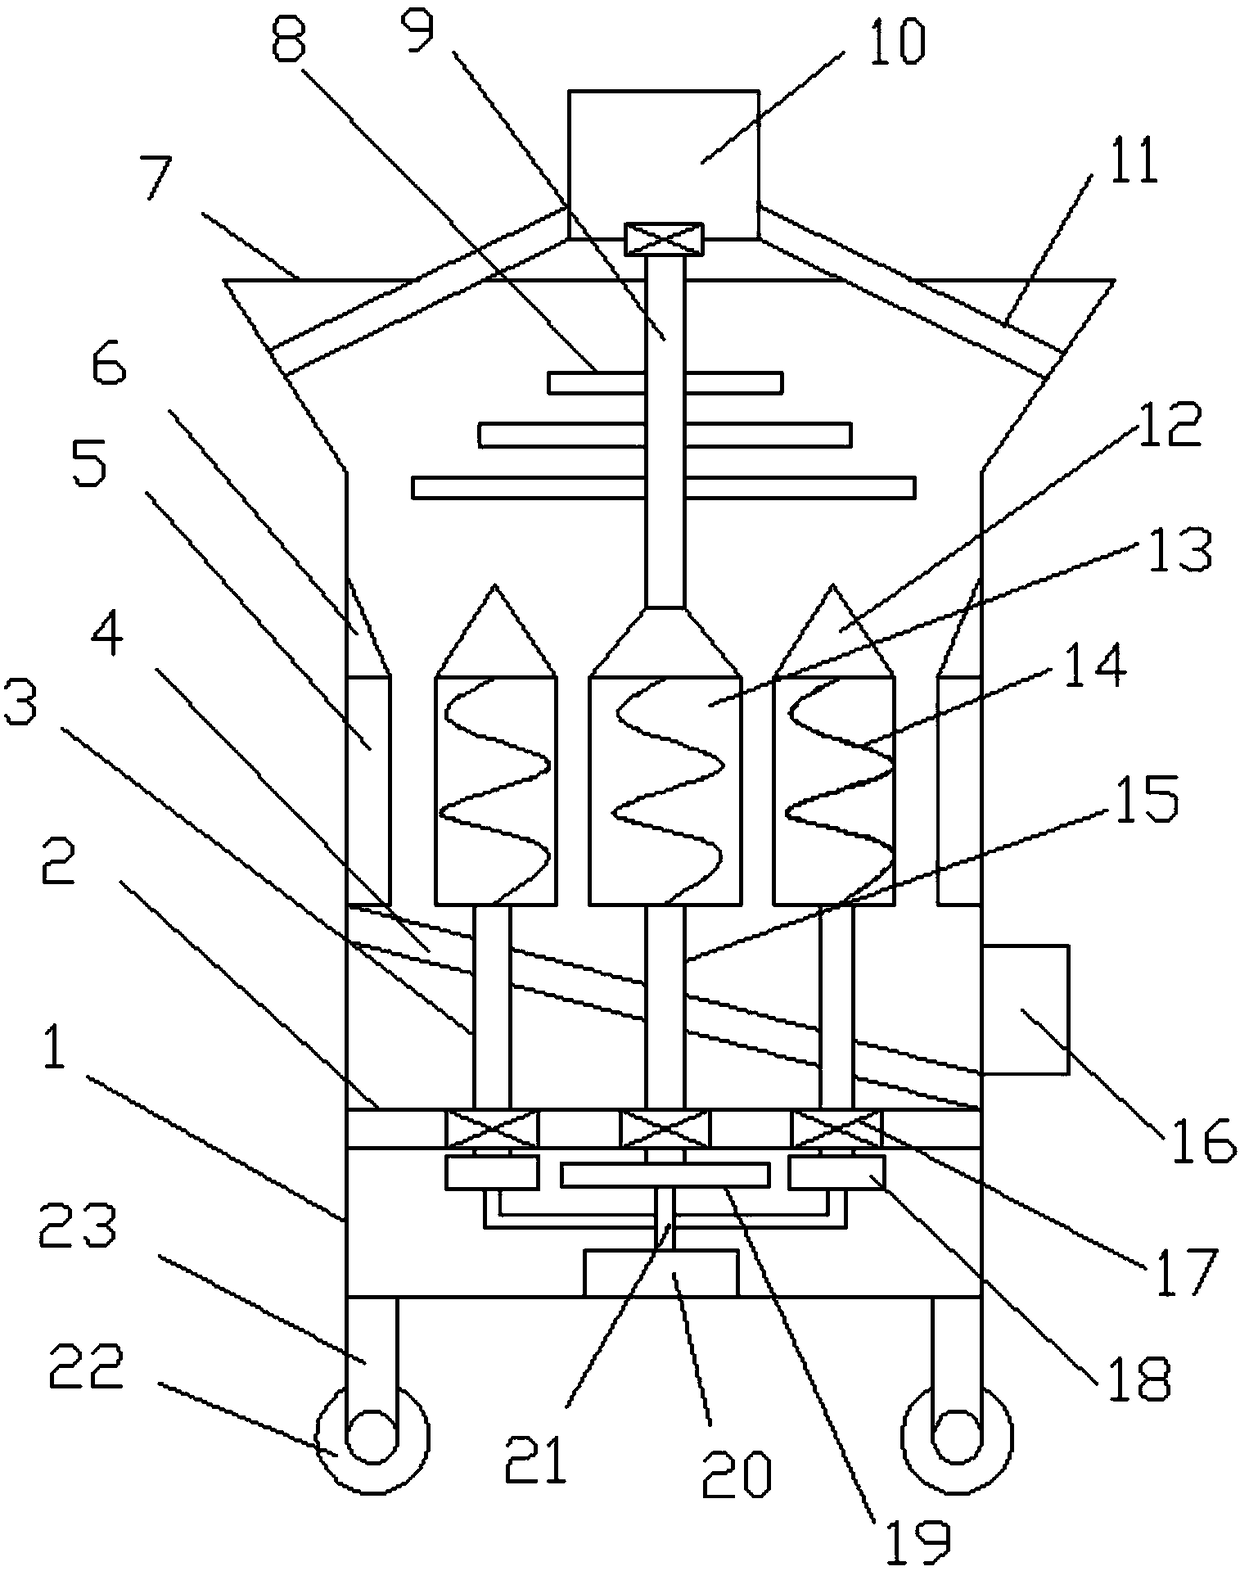 Efficient grain grinding and drying device and food processing system